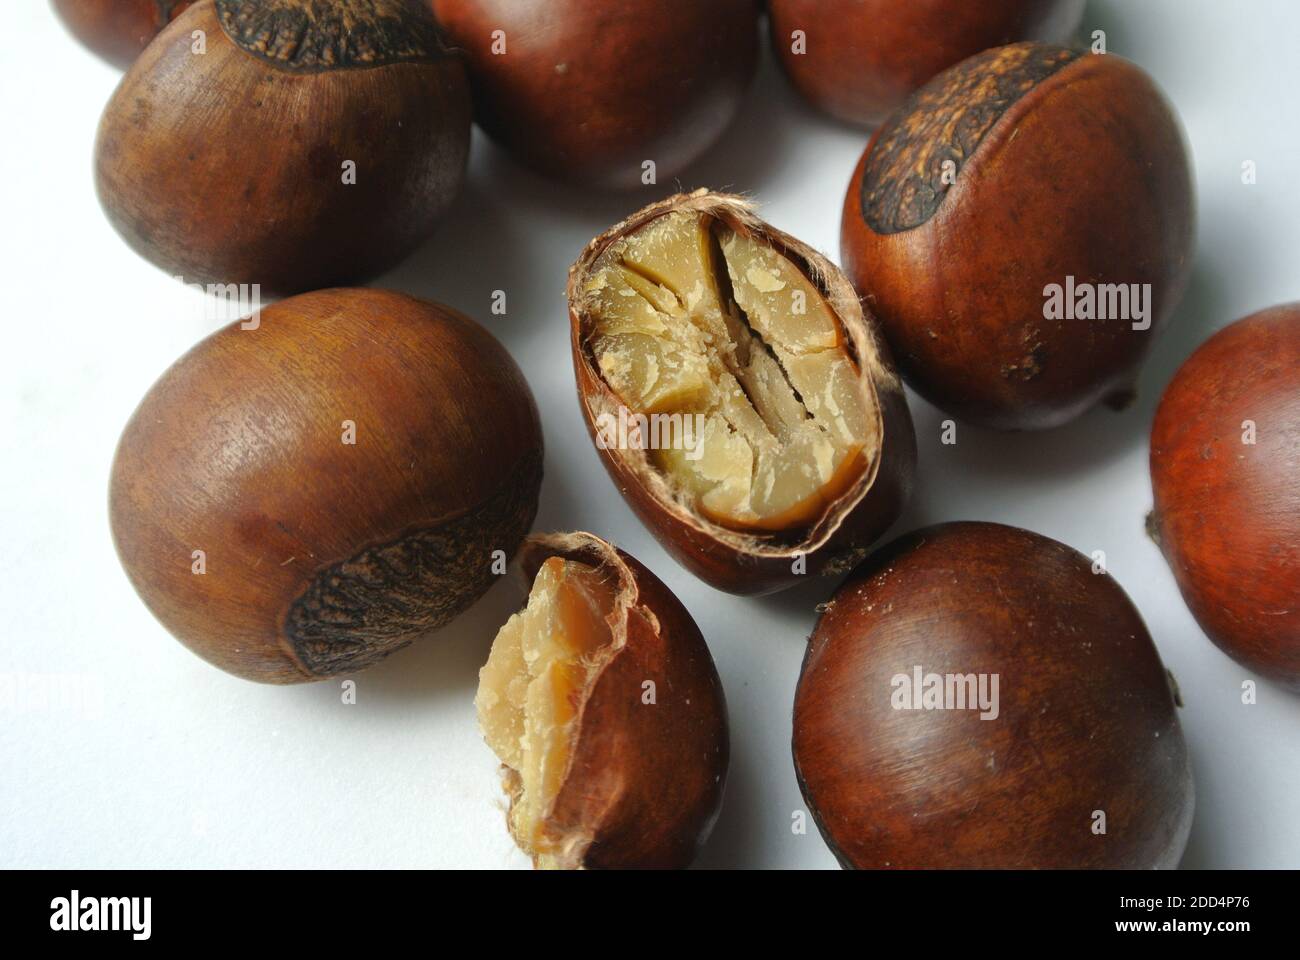 Chestnuts, low in fat and high in vitamin C, are more similar to fruits than true nuts. Isolated on green background. Selective focus. Stock Photo